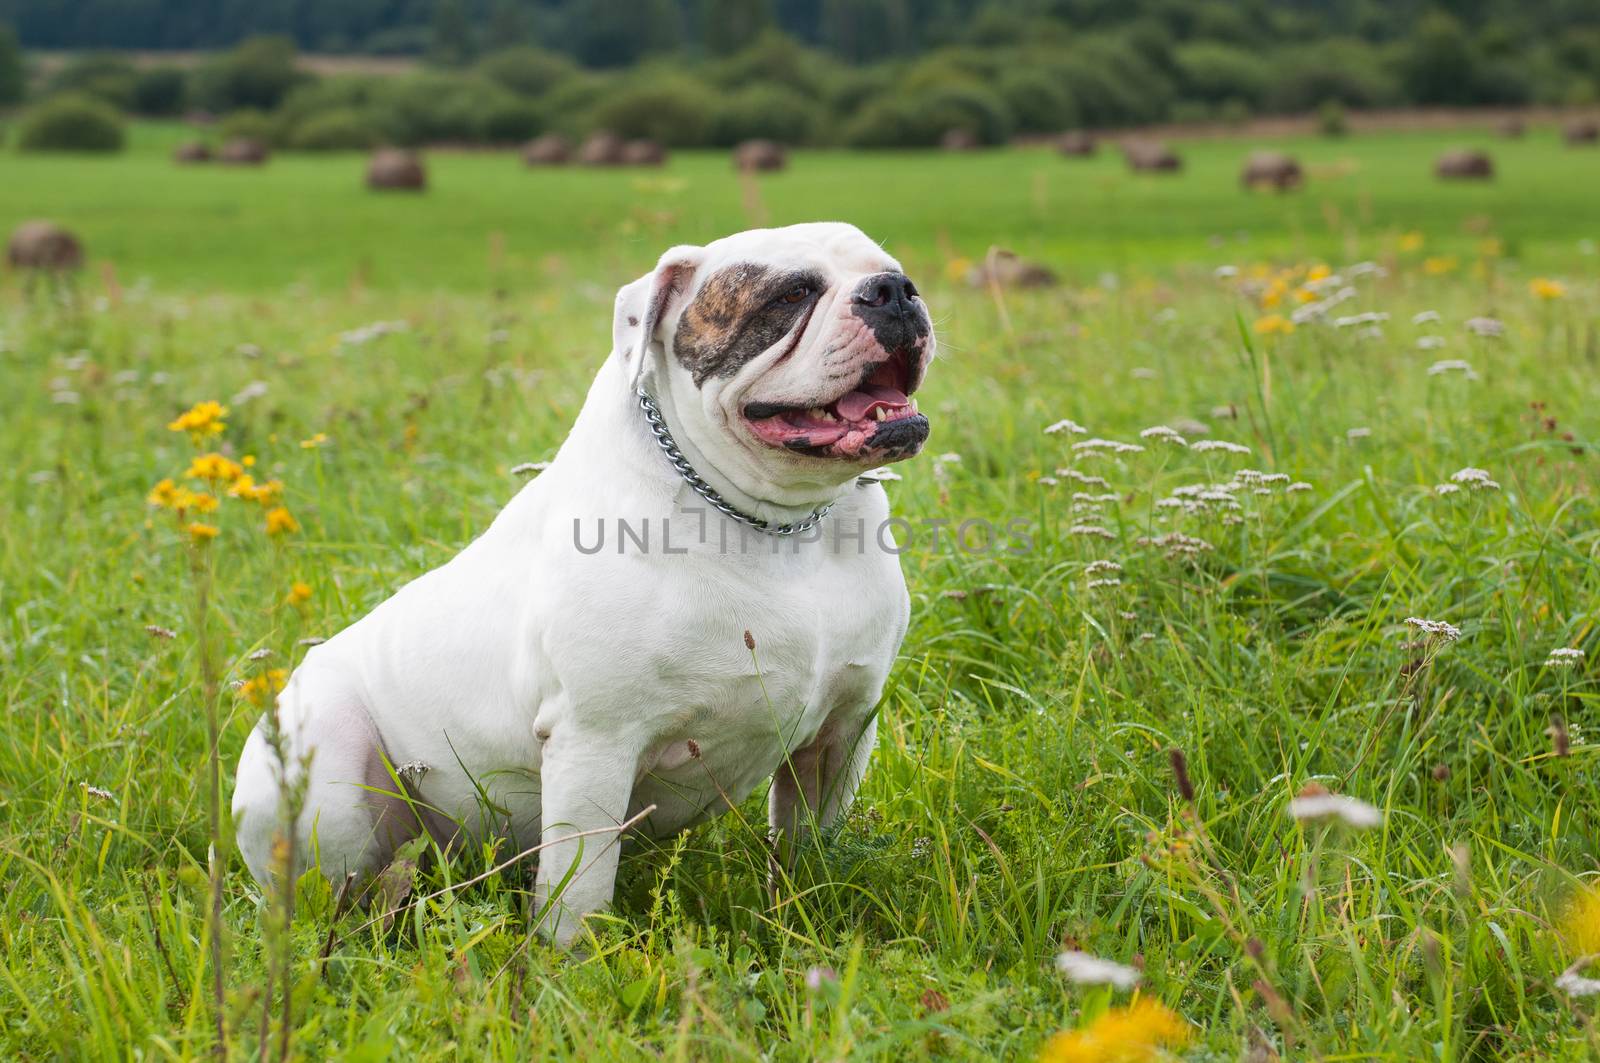 White American Bulldog dog on the field on green grass. American bulldog is a stocky, well built with a large head and a muscular build.